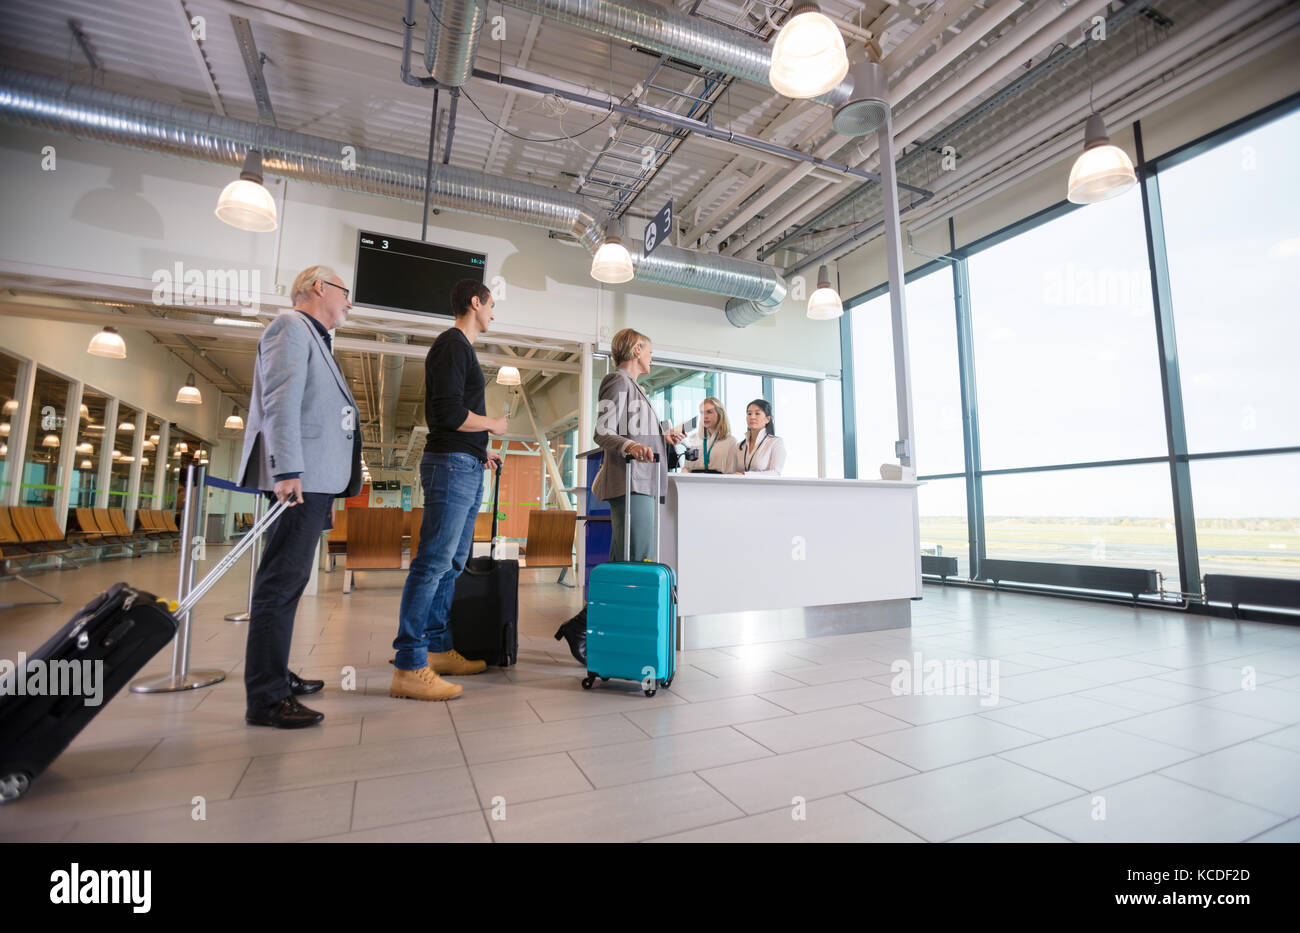 Low angle view of male and female passengers with luggage waiting at reception in airport Stock Photo